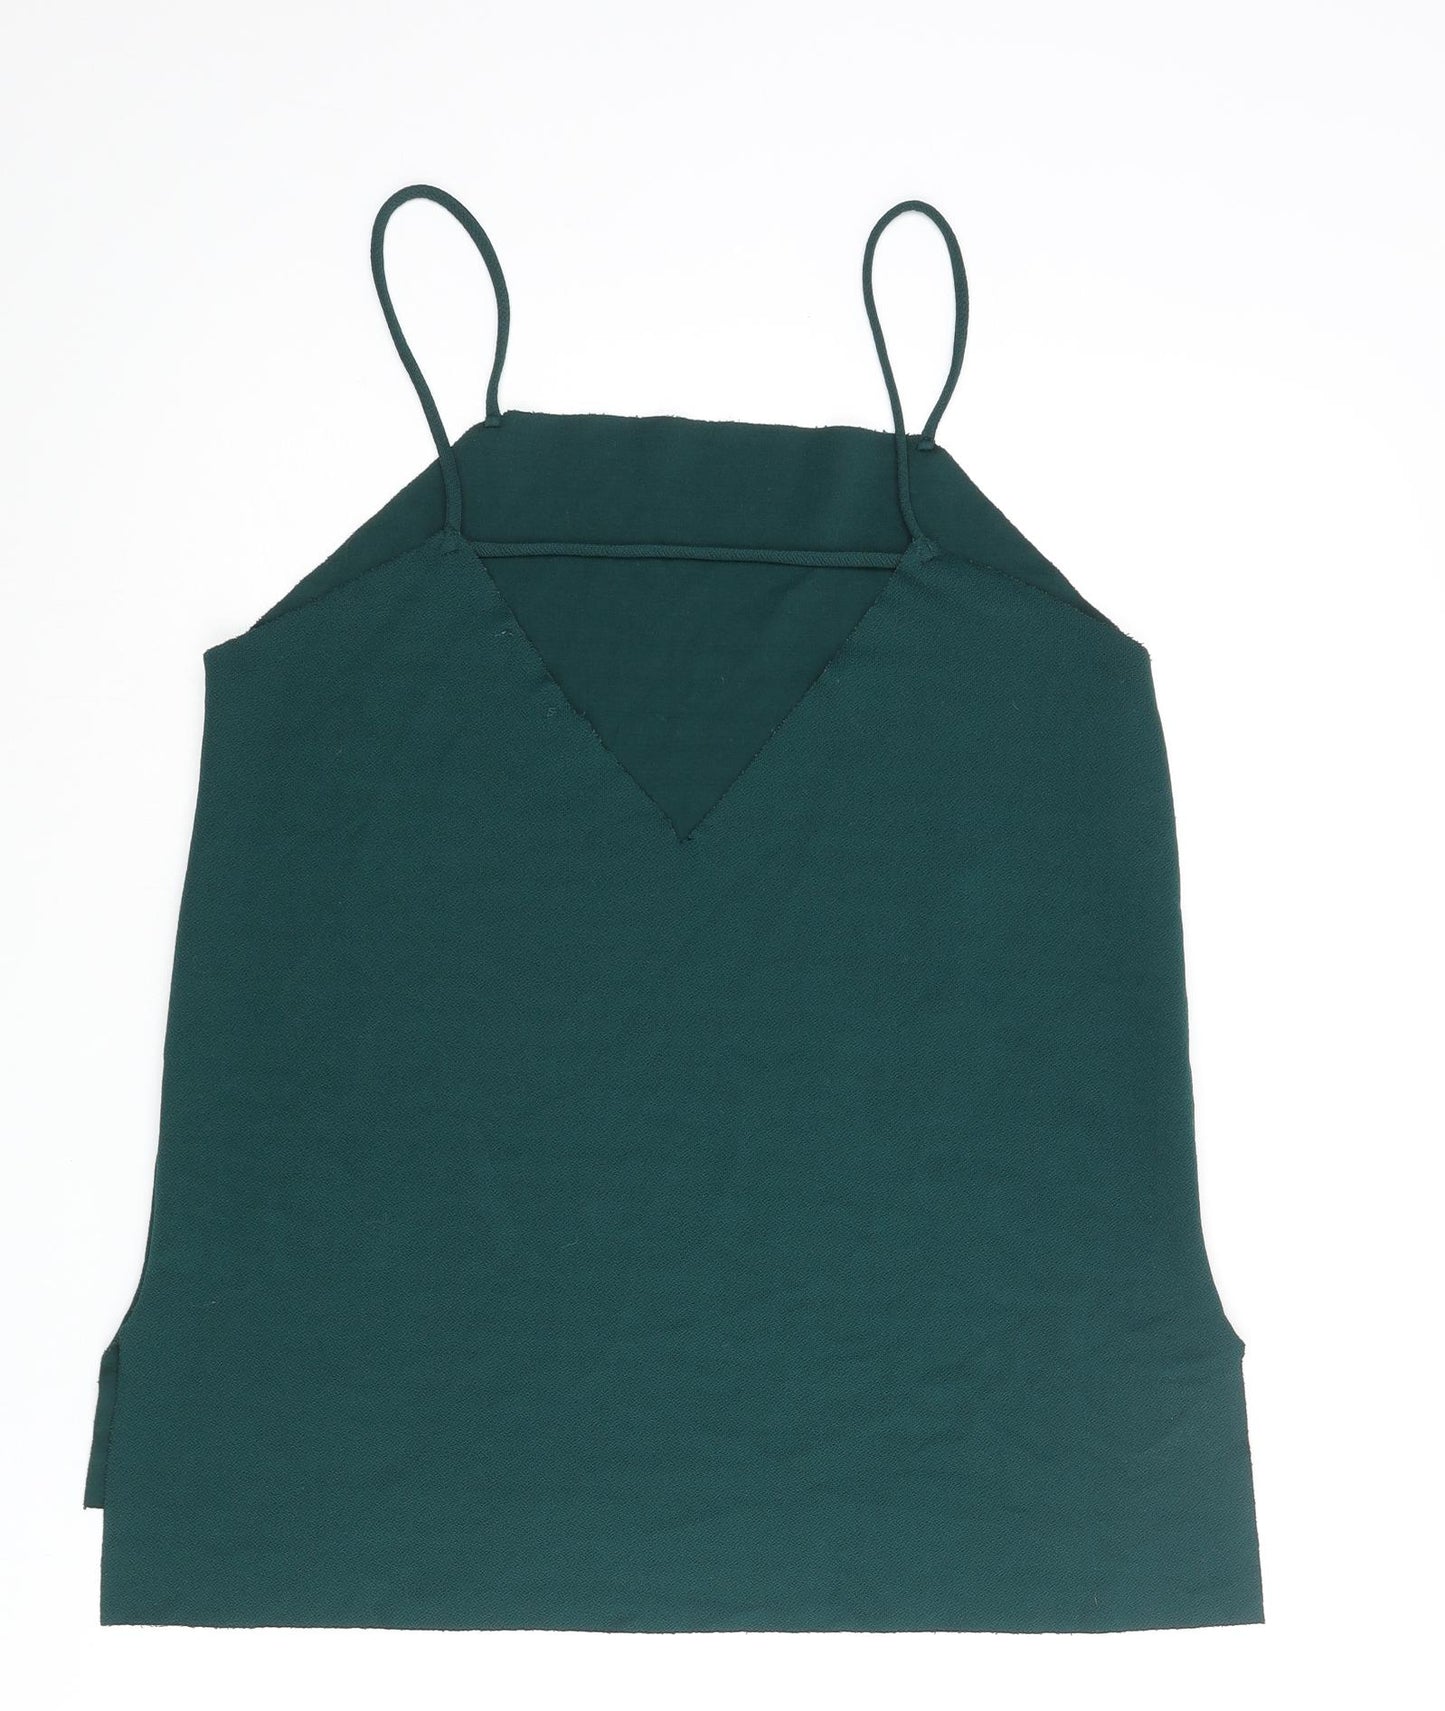 Pull&Bear Womens Green Polyester Camisole Blouse Size L Square Neck - Raw Finish